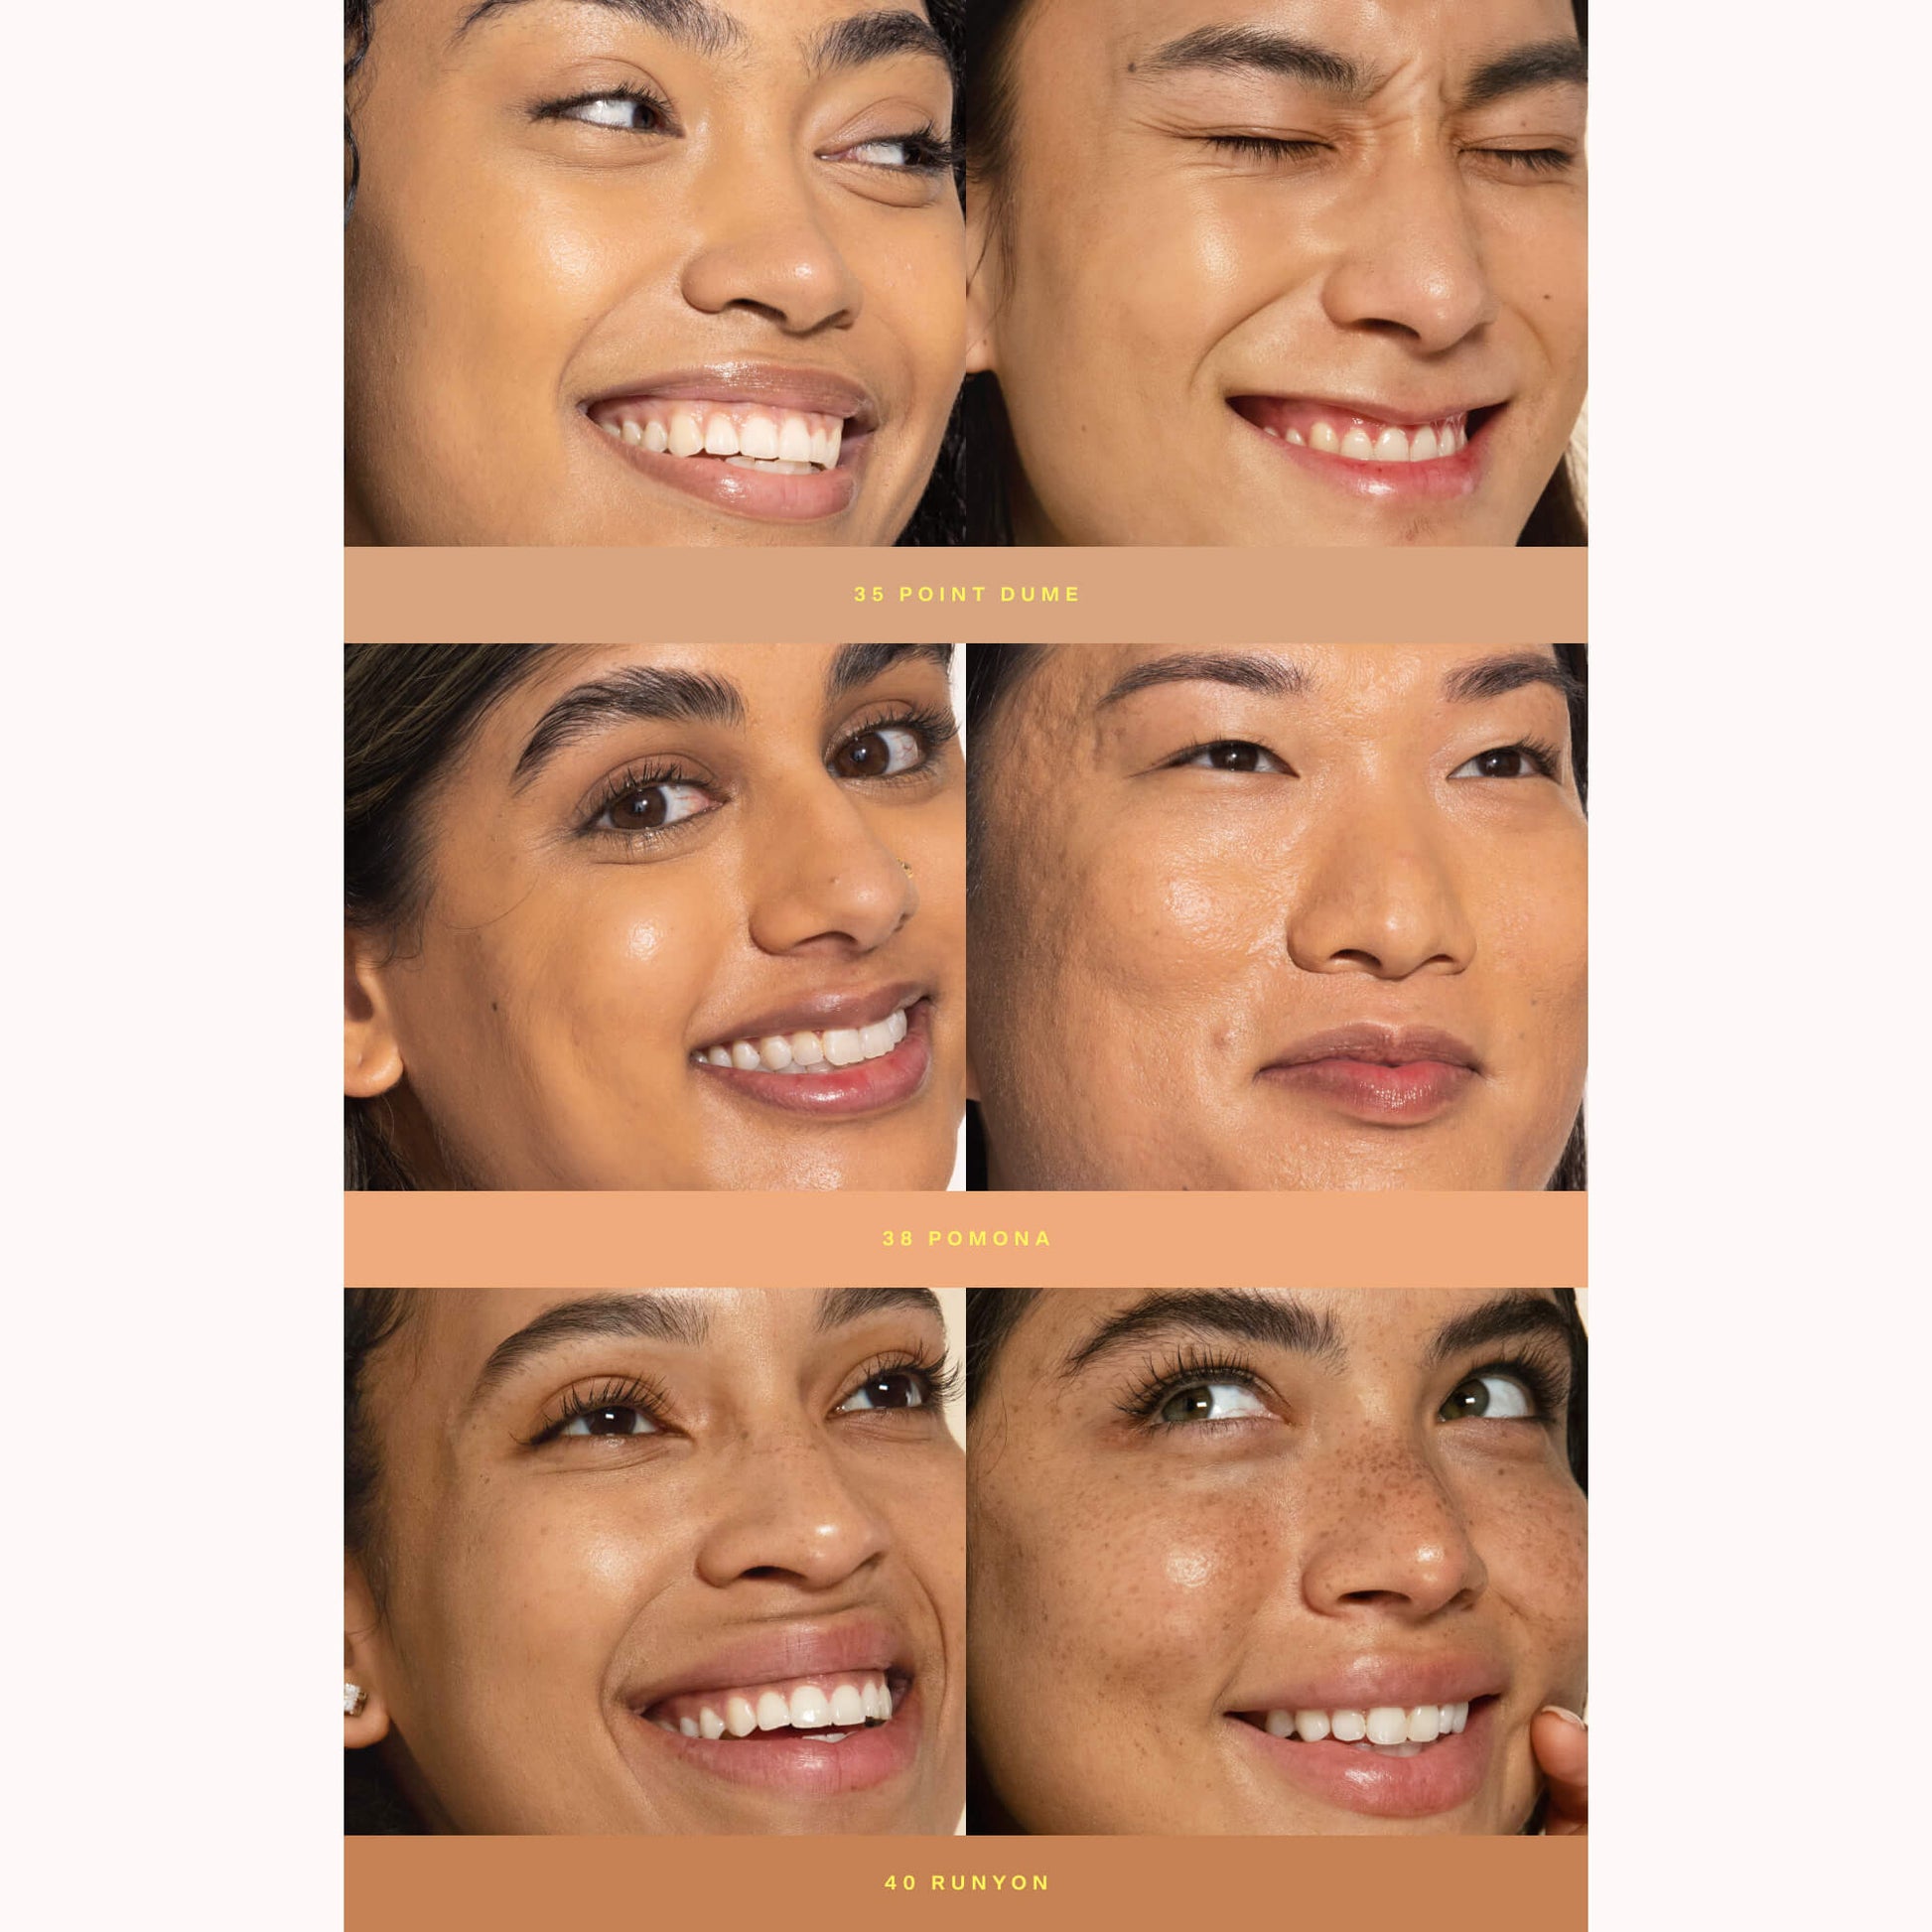 [Shade match chart showing 3 models wearing Mediumshade of Tower 28 SunnyDays SPF 30 Tinted Sunscreen Foundation, including shades:35 Point Dume,38 Pomona,40 Runyon